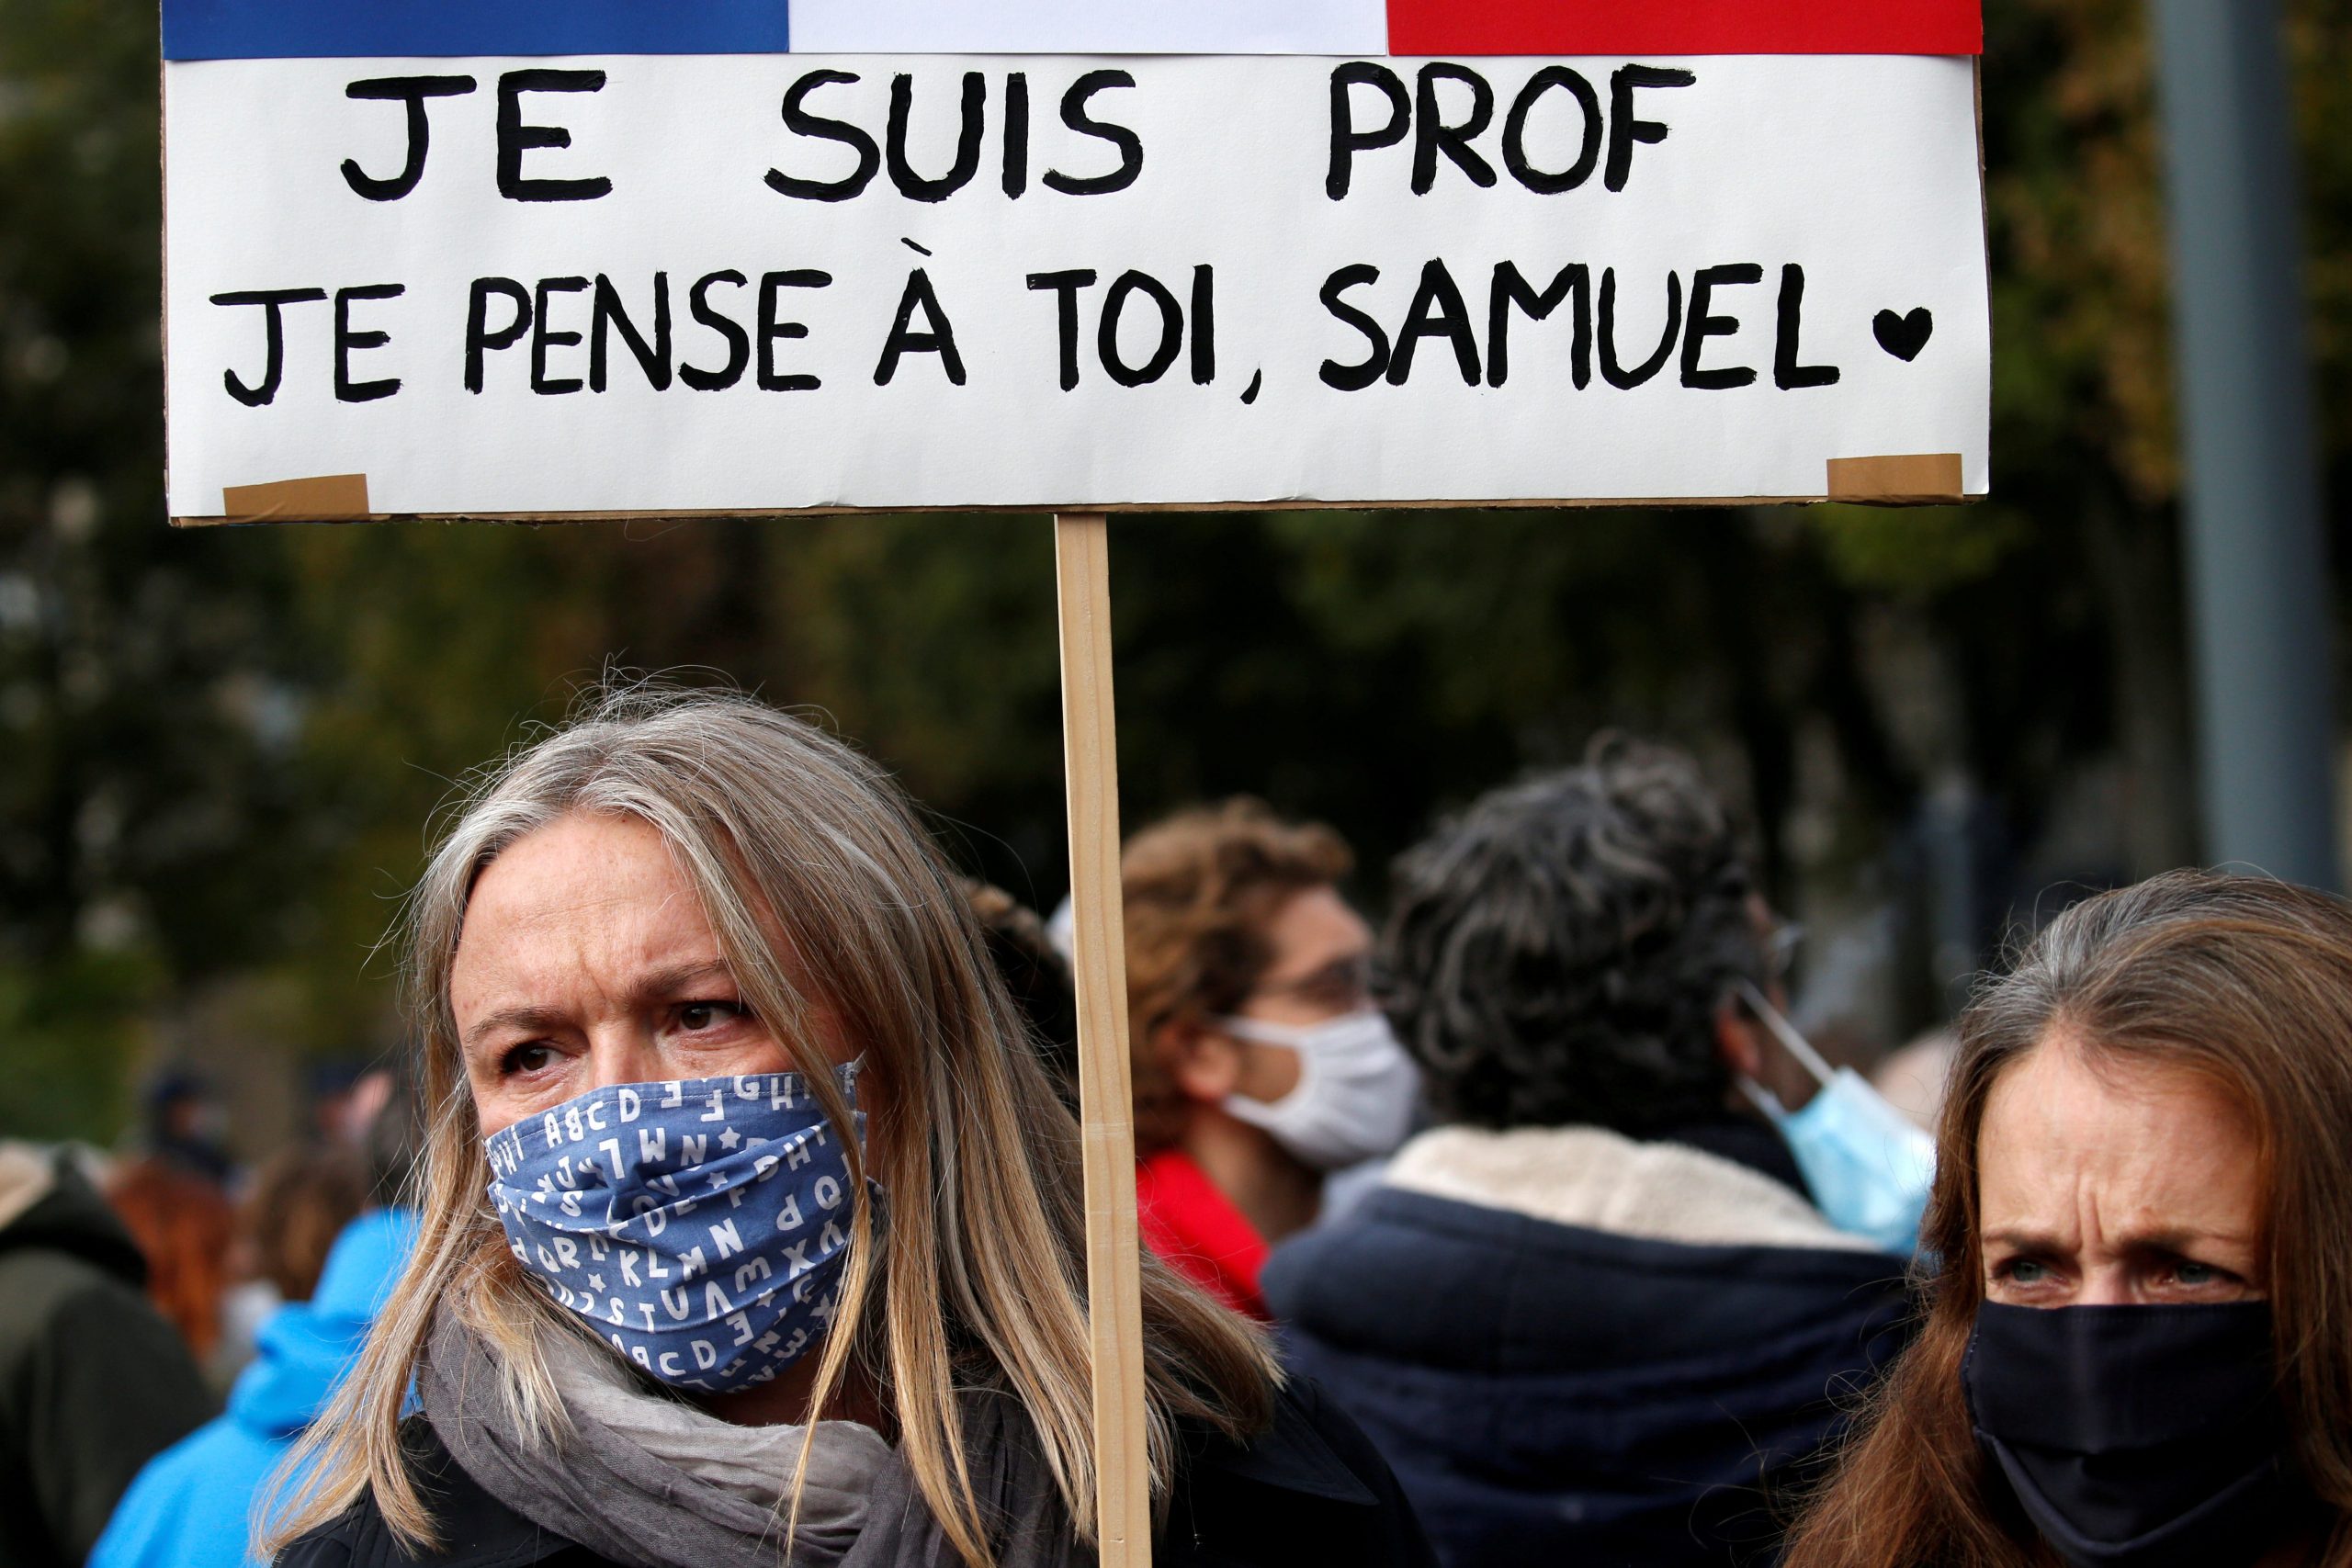 A woman holds a banner as she attends a tribute to Samuel Paty, the French teacher who was beheaded on the streets of the Paris suburb of Conflans St Honorine, at the Place de la Republique, in Lille, France, October 18, 2020.